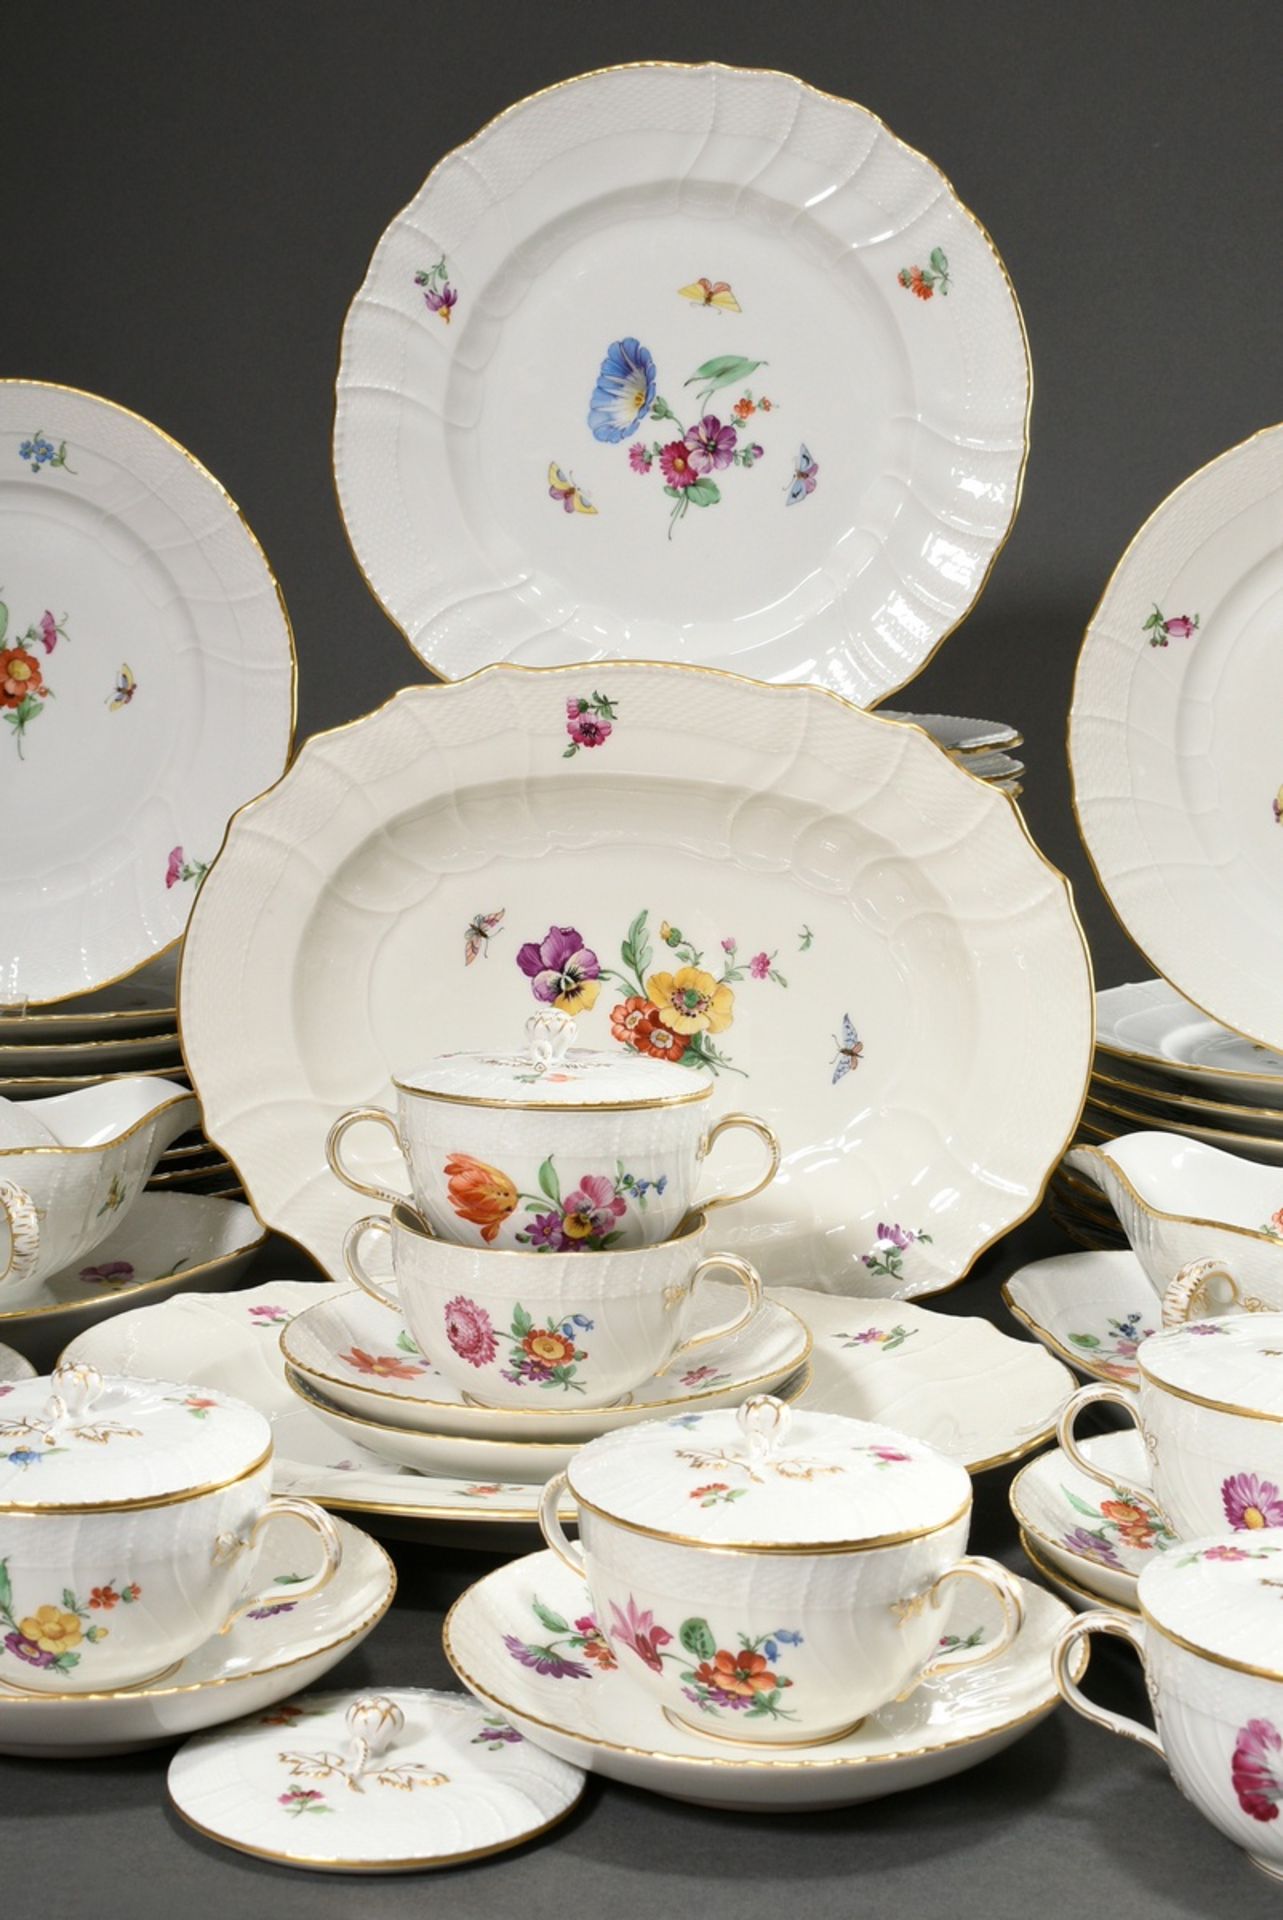 114 pieces KPM dinner service "Neuosier" with polychrome painting "flowers and insects" consisting 